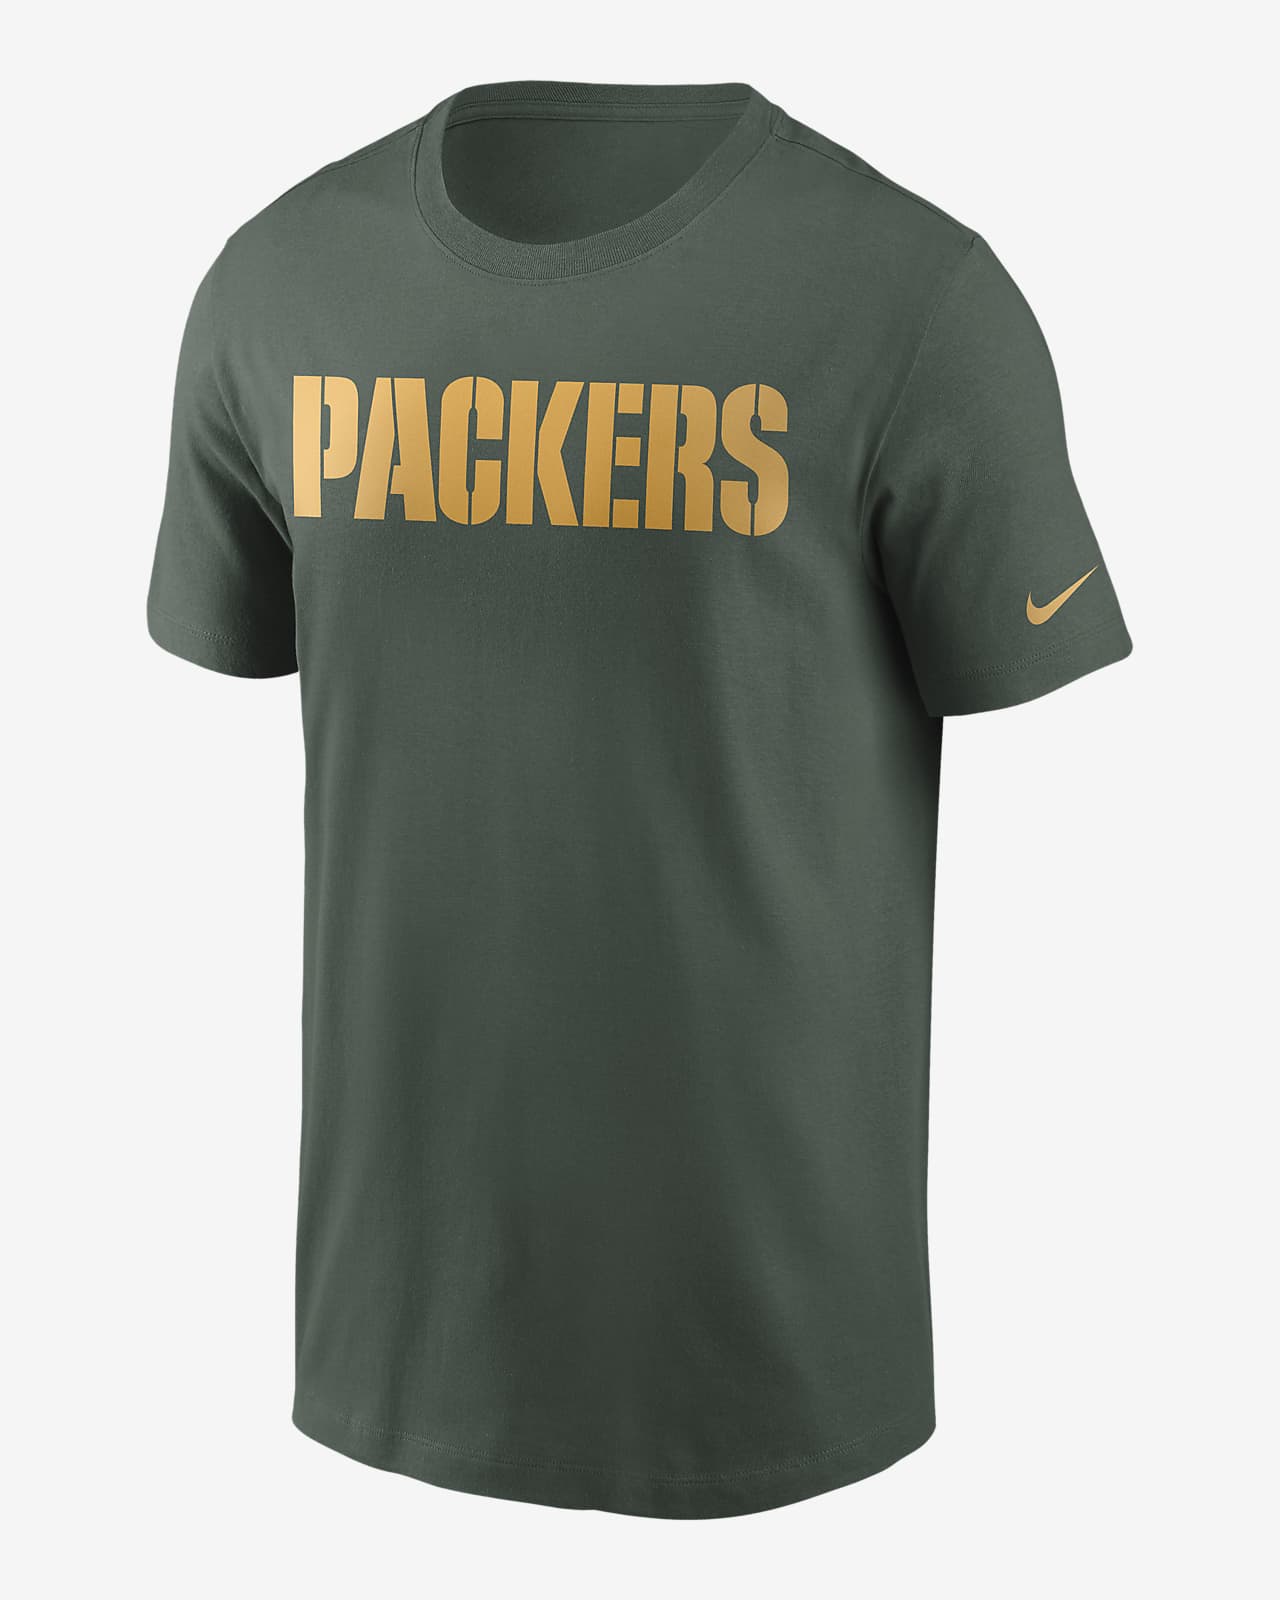 Lively do not do Saturate Nike (NFL Packers) Men's T-Shirt. Nike.com